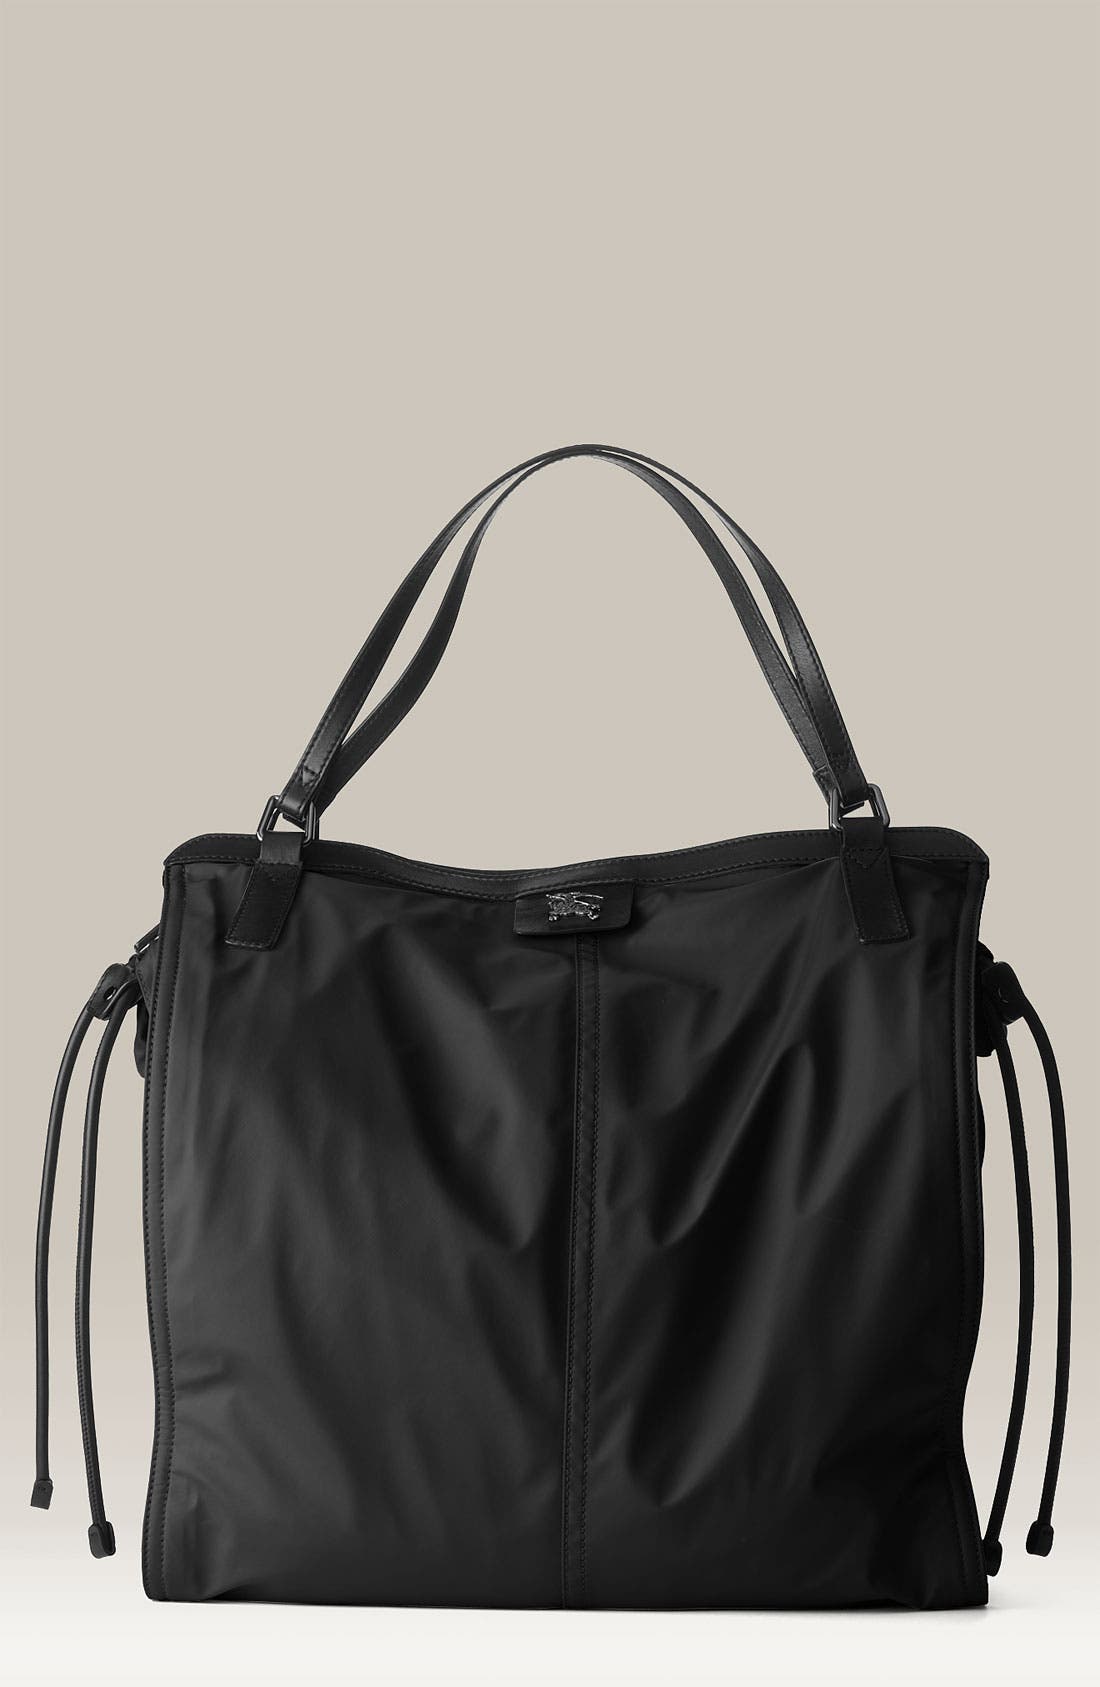 burberry buckleigh tote nordstrom